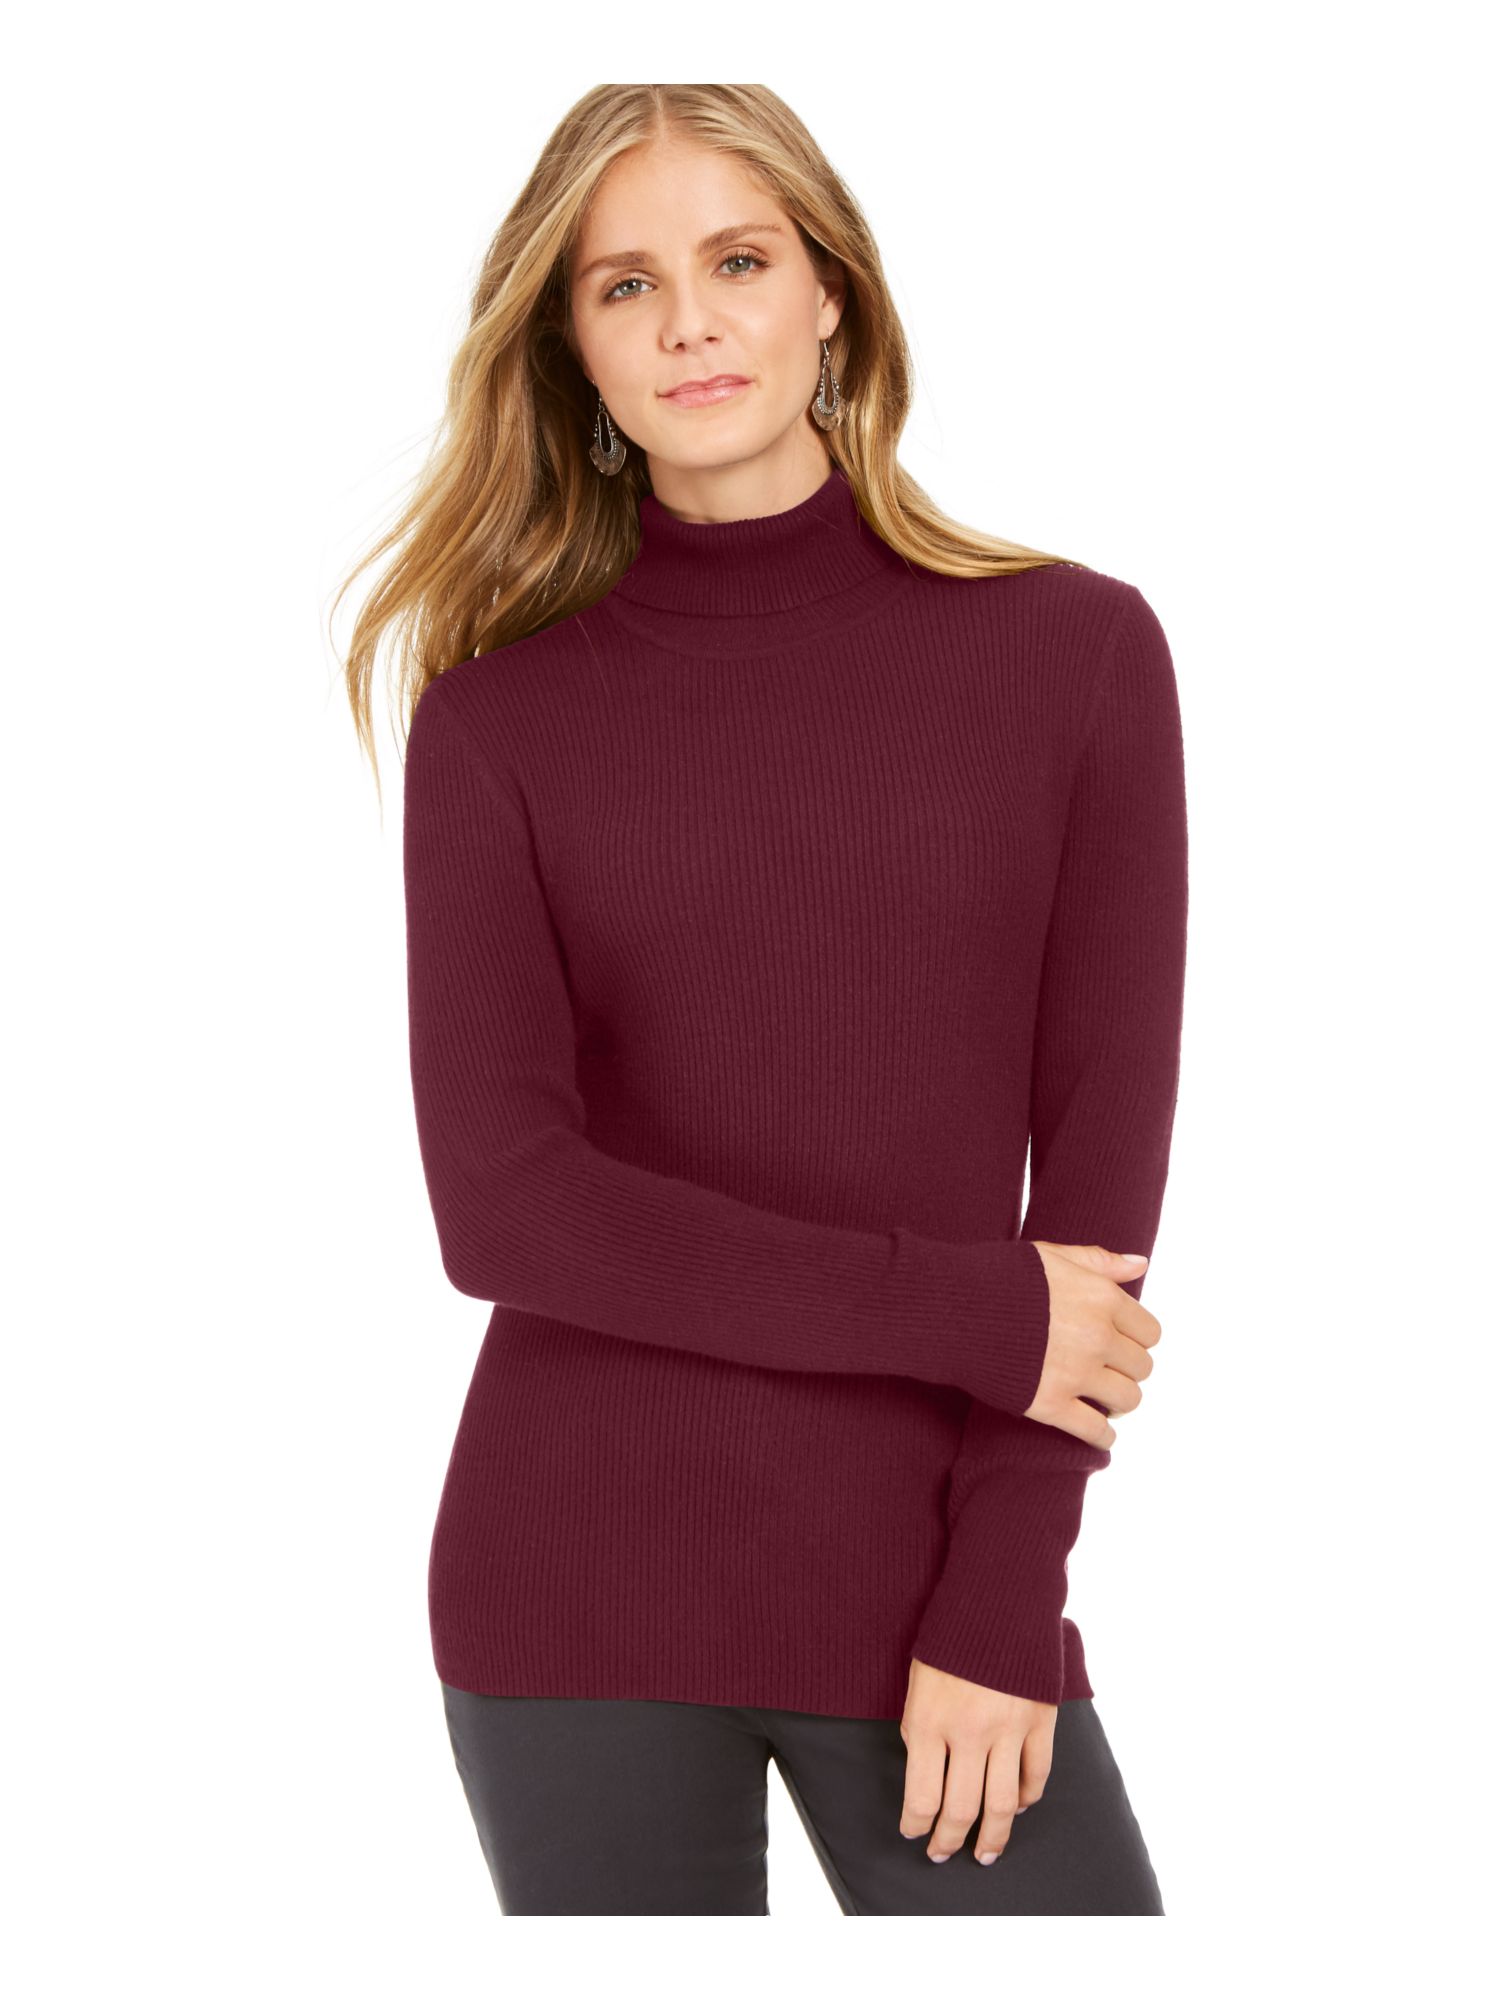 STYLE & COMPANY Womens Maroon Long Sleeve Sweater Size: L - image 1 of 2